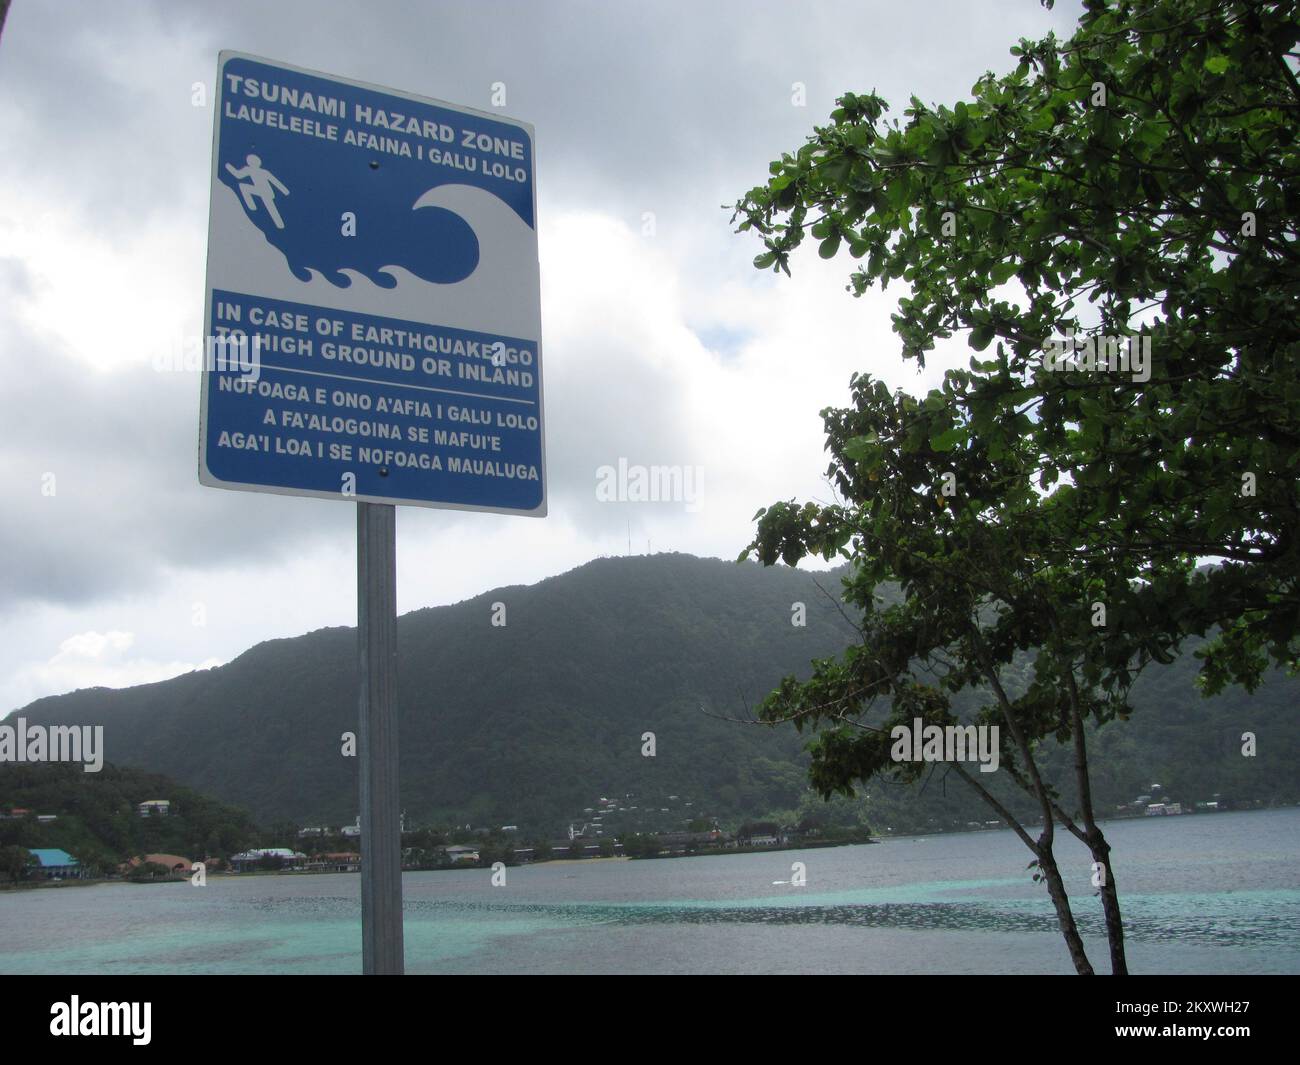 Pago Pago, American Samoa, Sep. 28, 2012   Purchase of emergency signage as part of 'Tsunami Ready' designation. American Samoa Earthquake, Tsunami, and Flooding. Photographs Relating to Disasters and Emergency Management Programs, Activities, and Officials Stock Photo